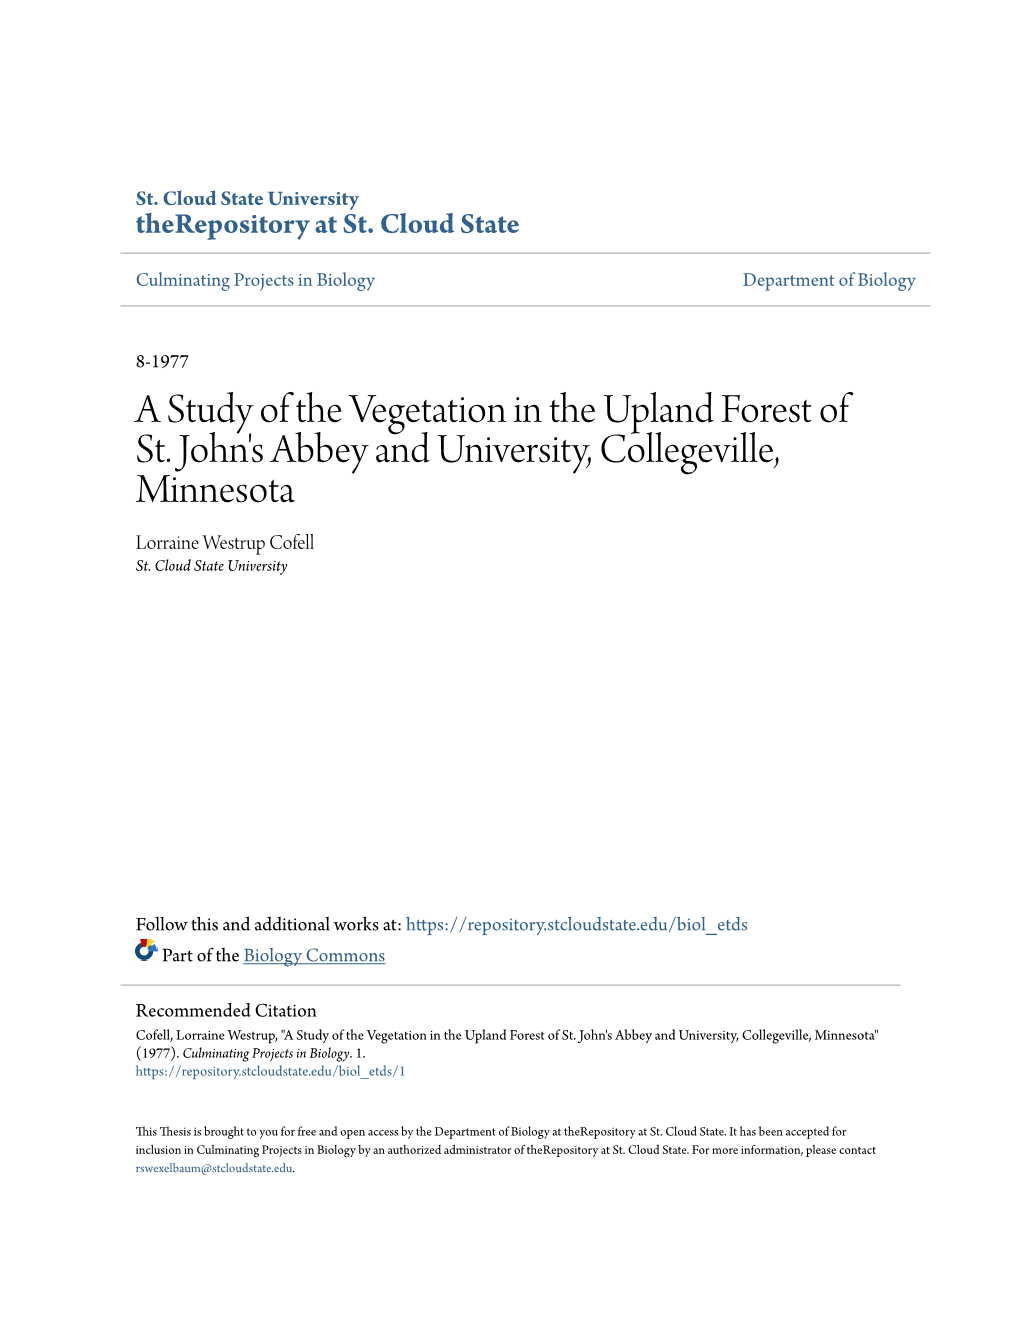 A Study of the Vegetation in the Upland Forest of St. John's Abbey and University, Collegeville, Minnesota Lorraine Westrup Cofell St